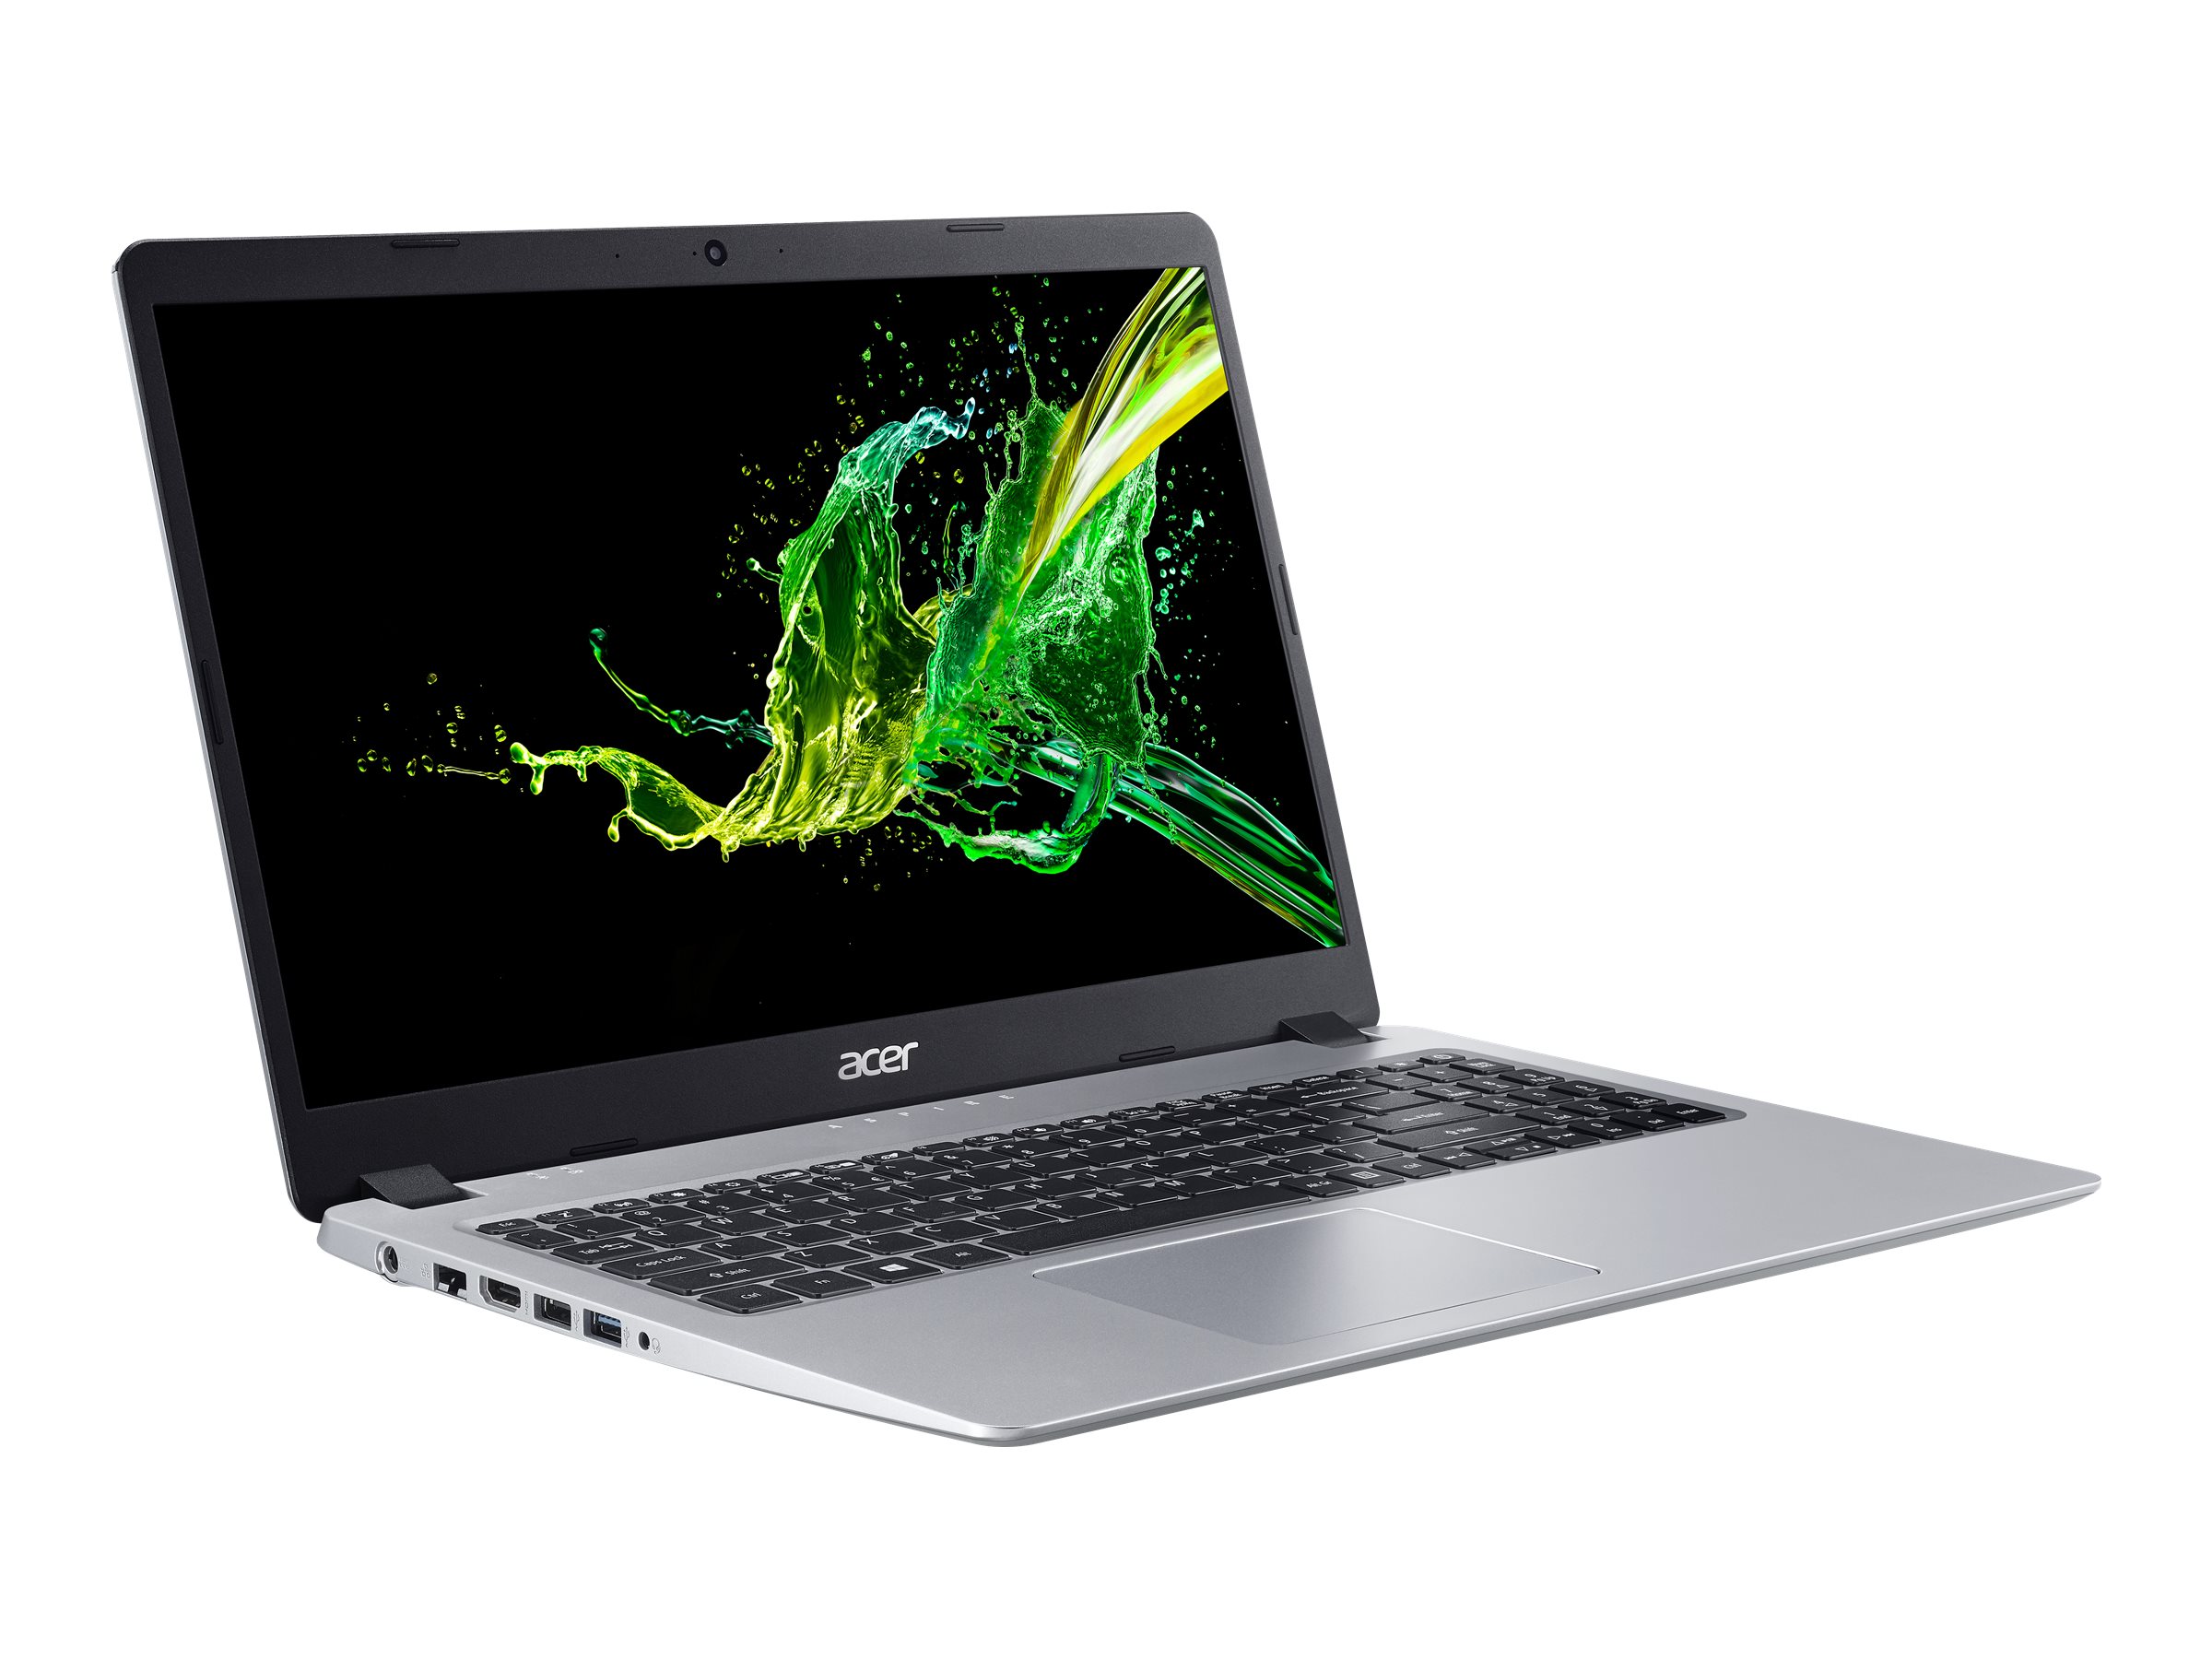 Acer A515-43-R19L 15.6 in. Aspire 5 Slim Laptop Full HD IPS Display Laptop - Silver - image 4 of 7